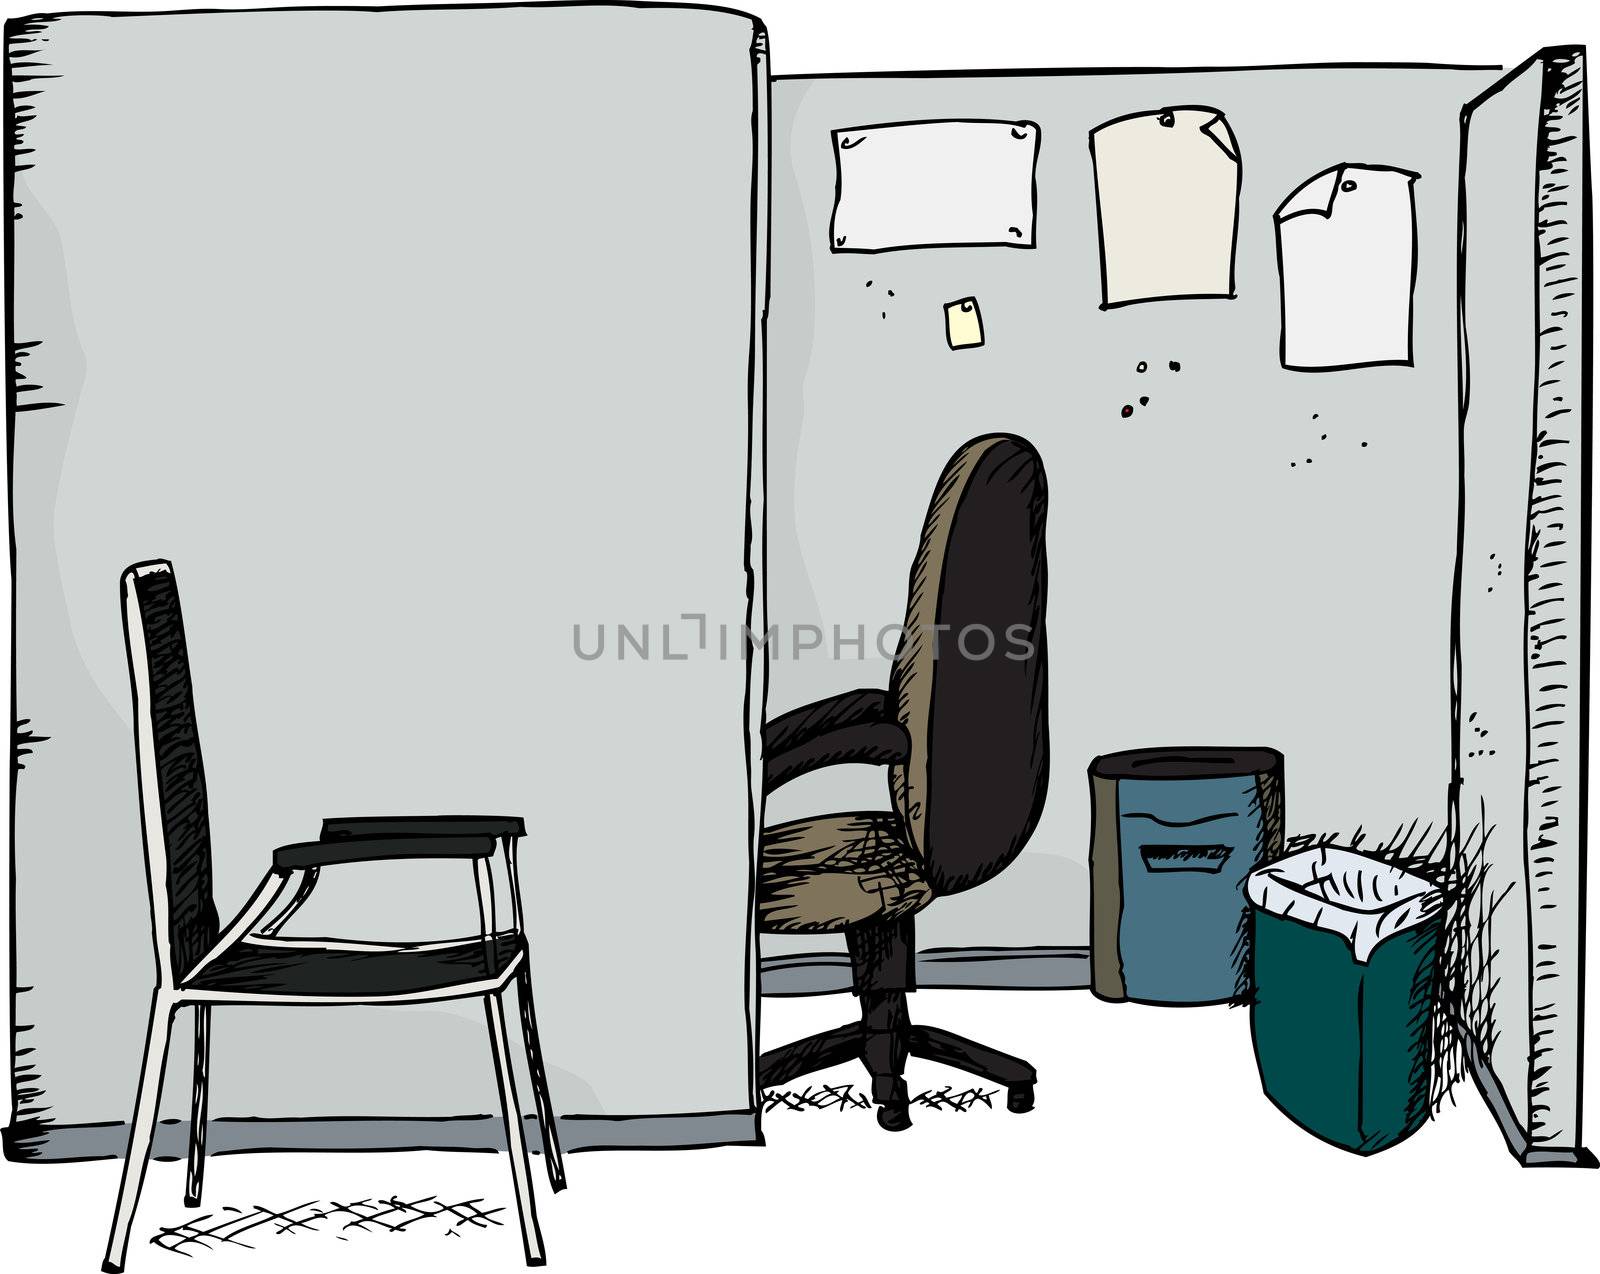 Office Cubicle with Chairs by TheBlackRhino